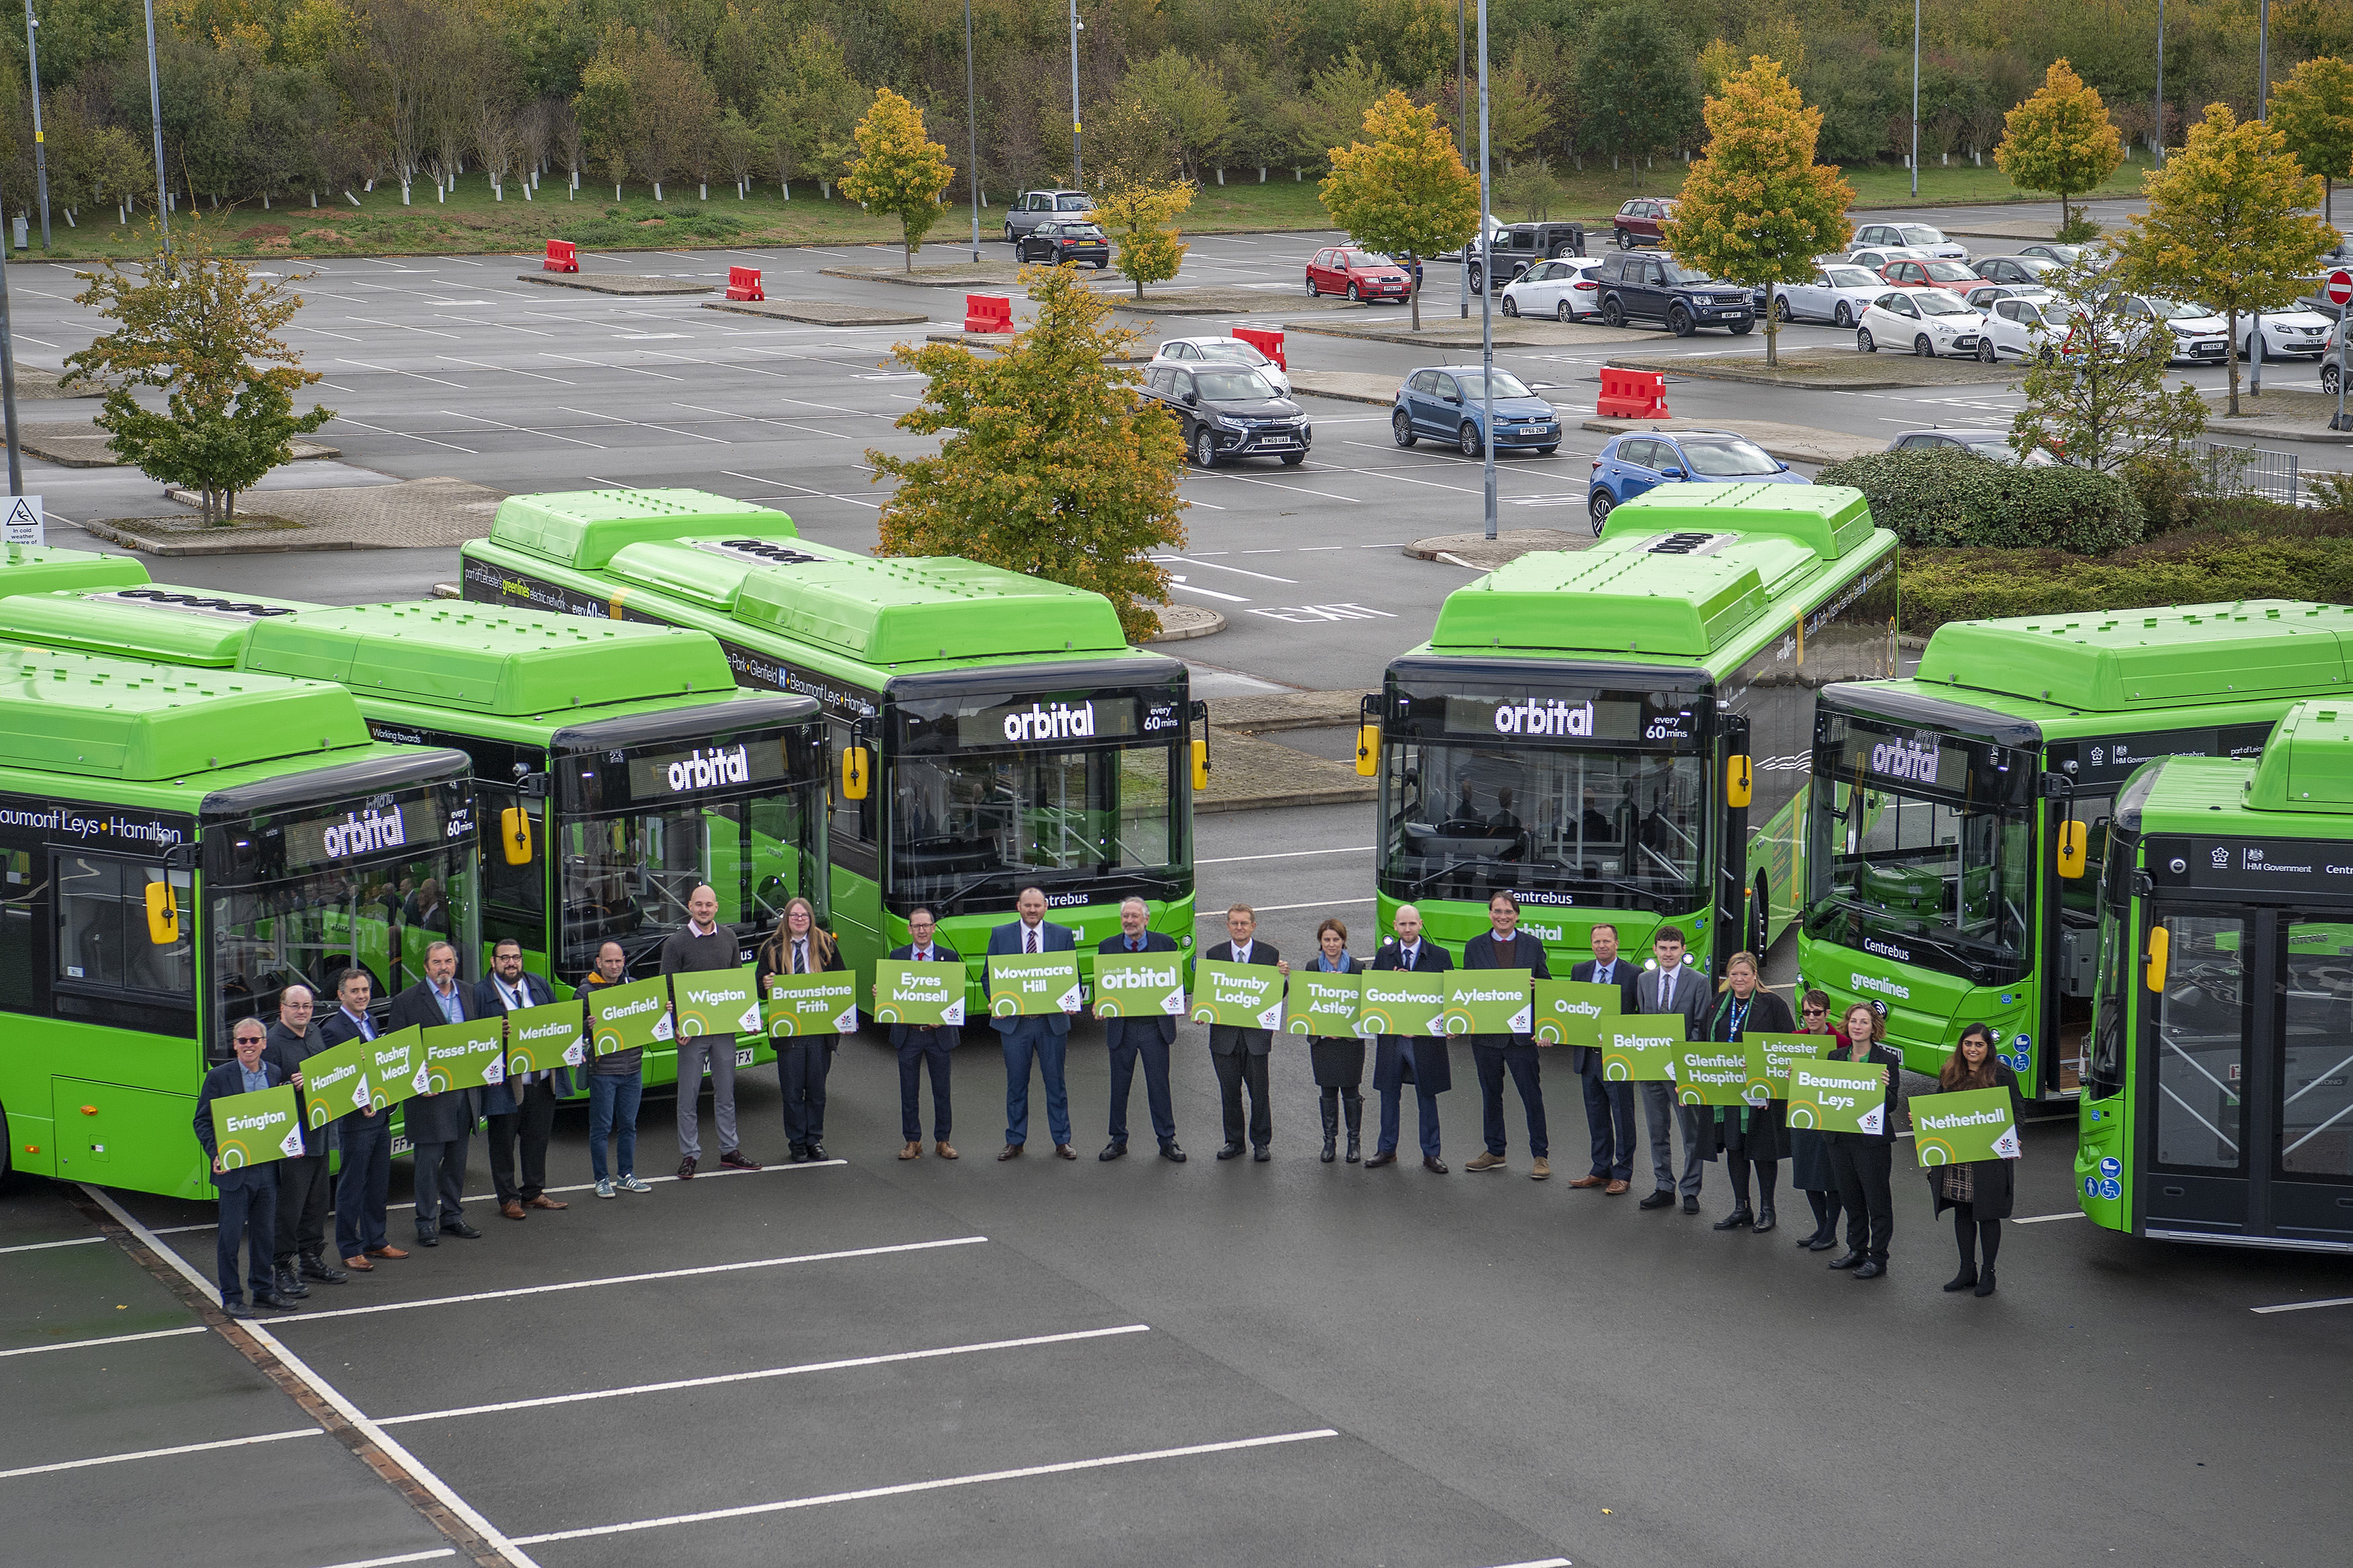 UK's longest electric circular bus route launched in city